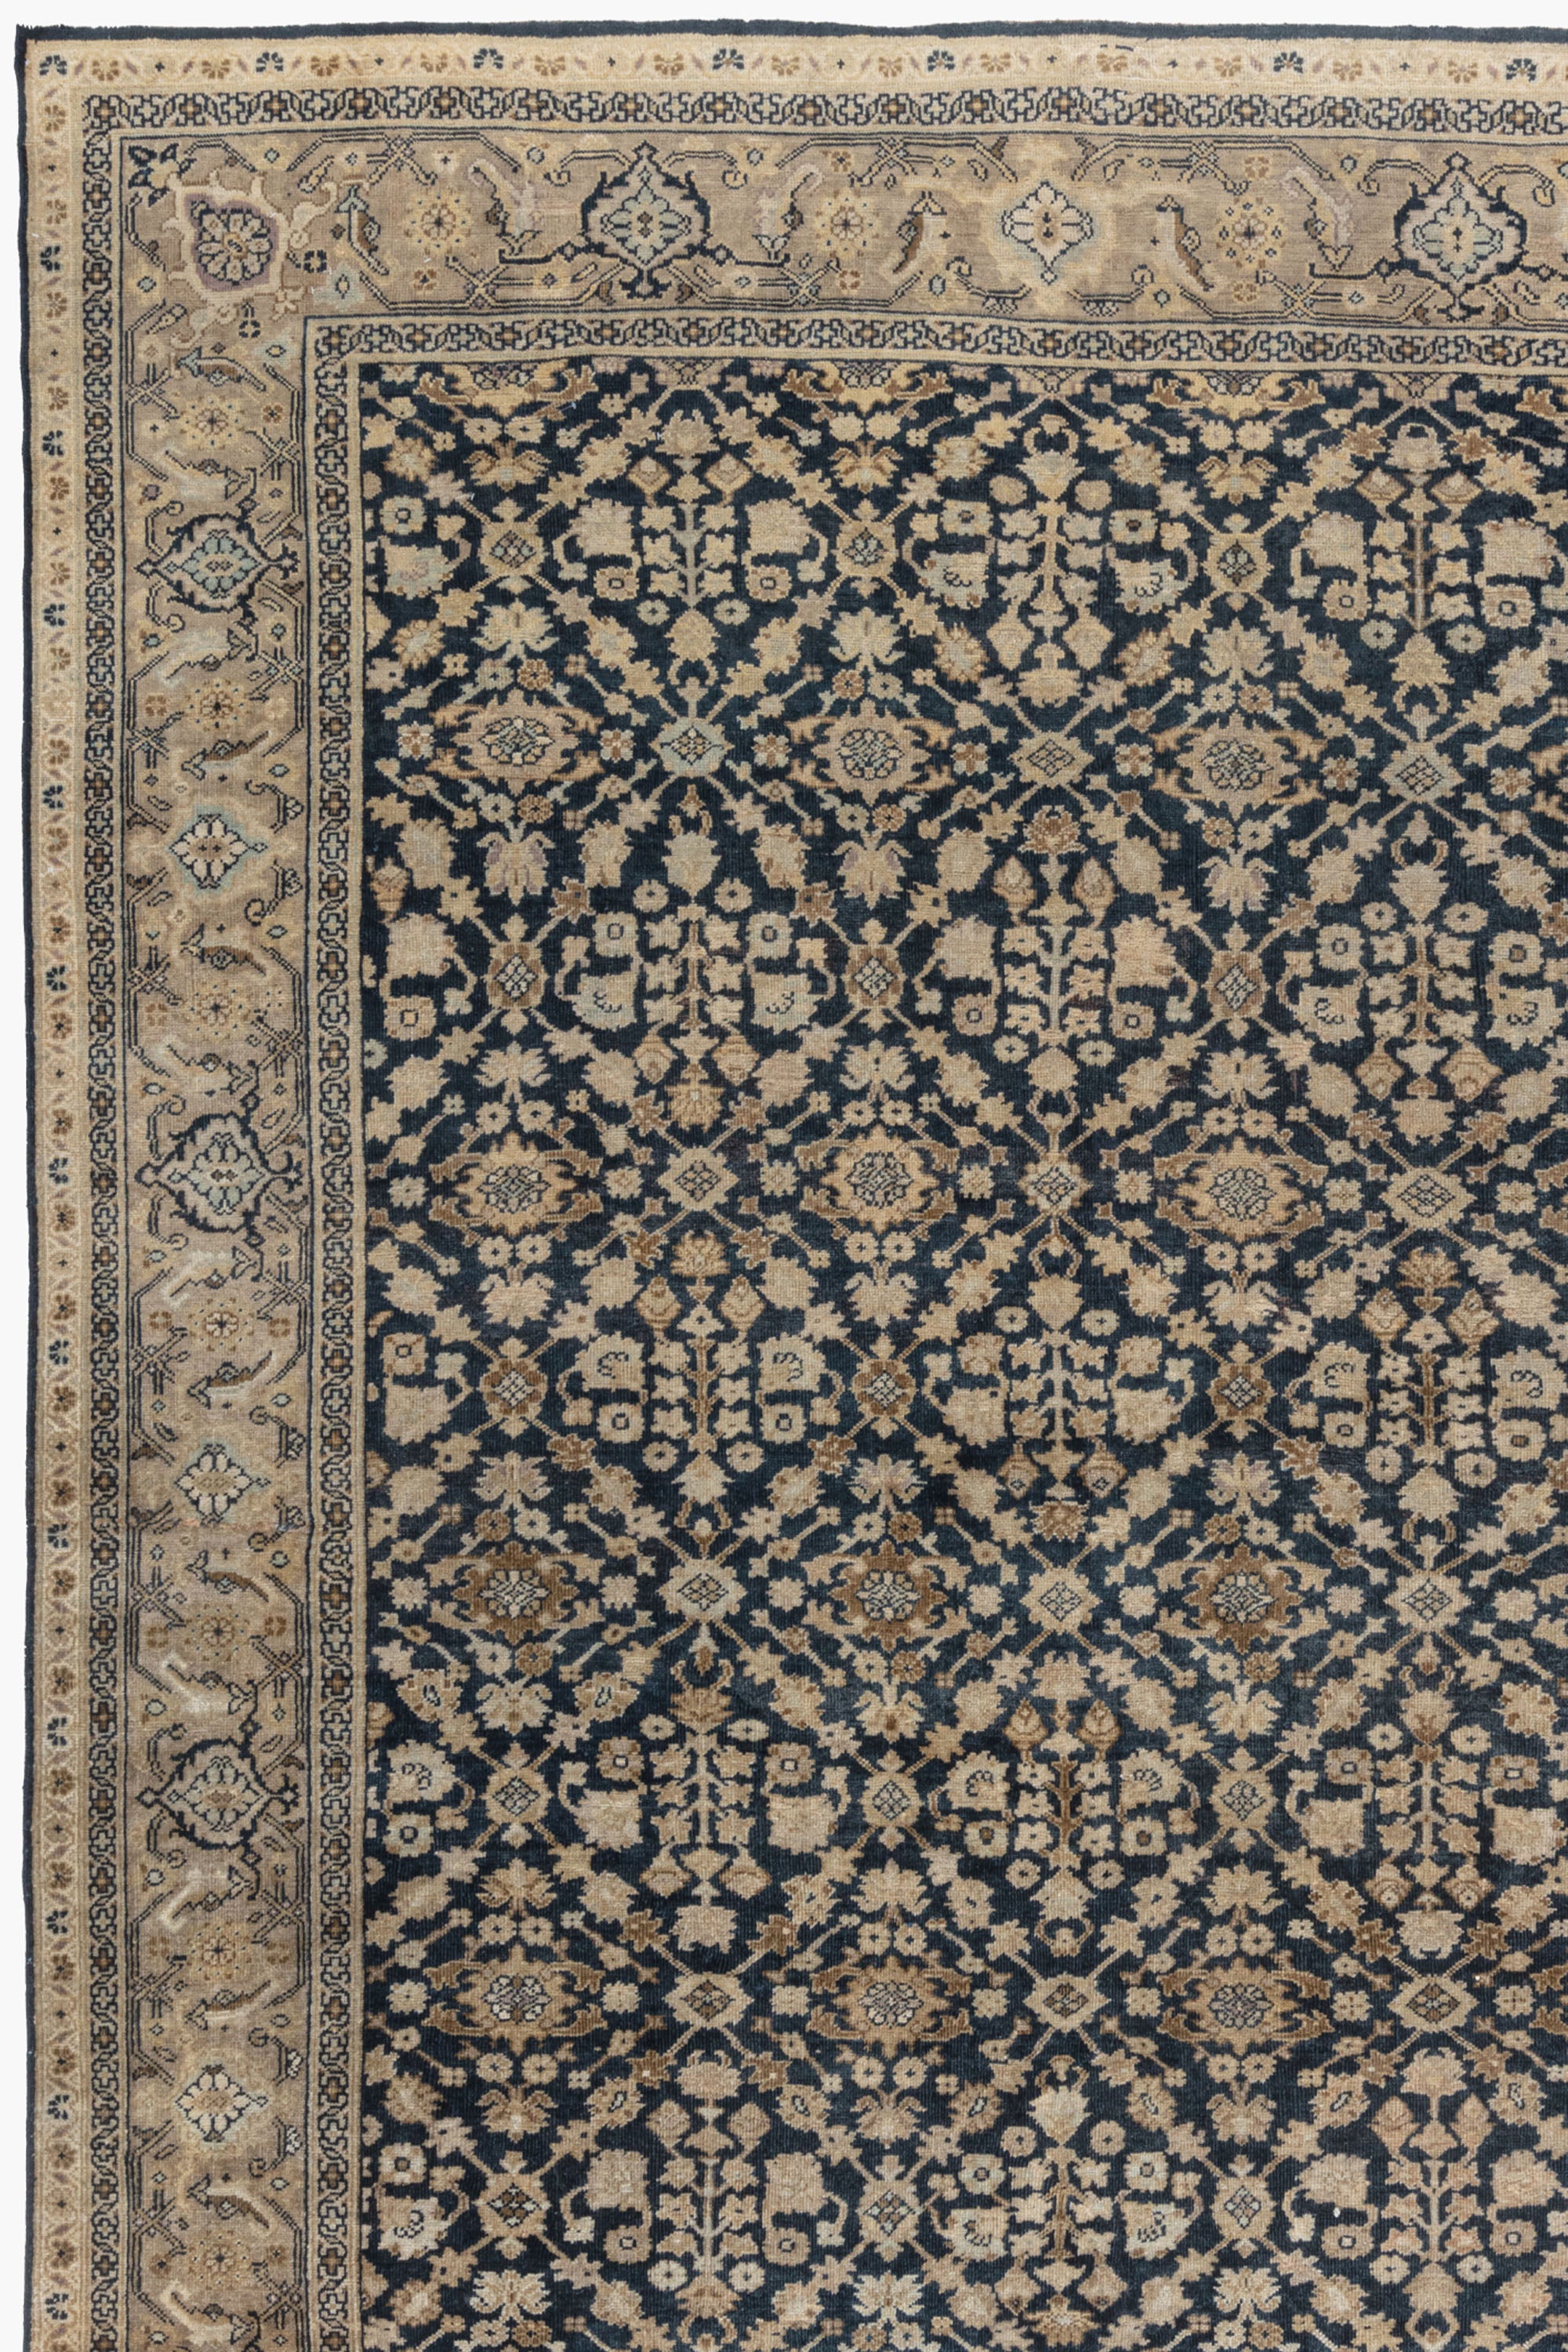 SULTANABAD RUG, WEST PERSIA, 9'7" X 13'4" - thumbnail 2